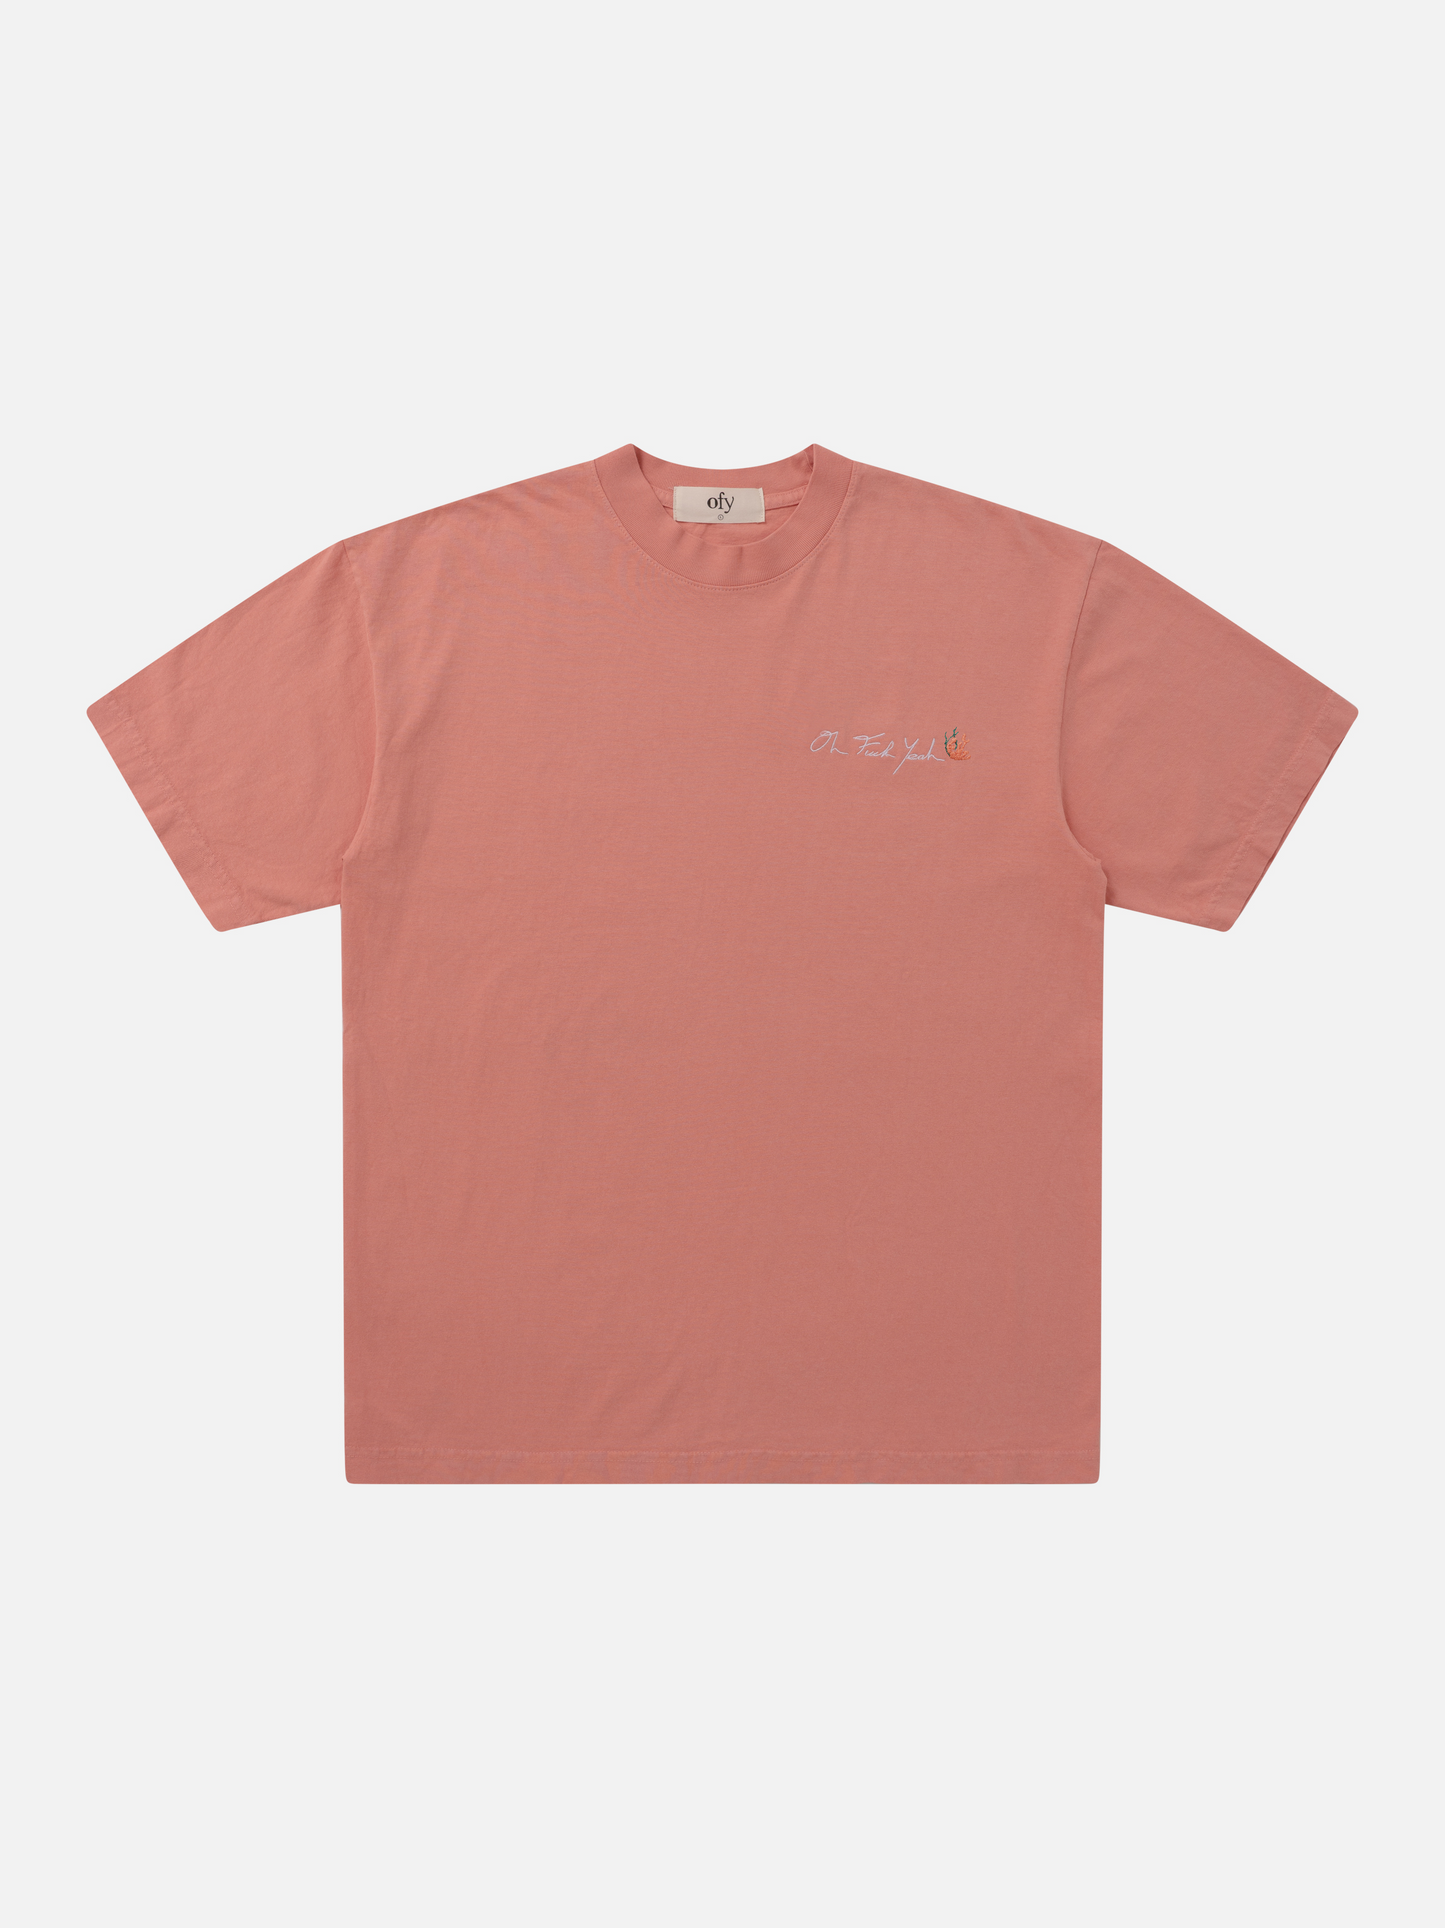 Classic Tee - Coral Embroidery